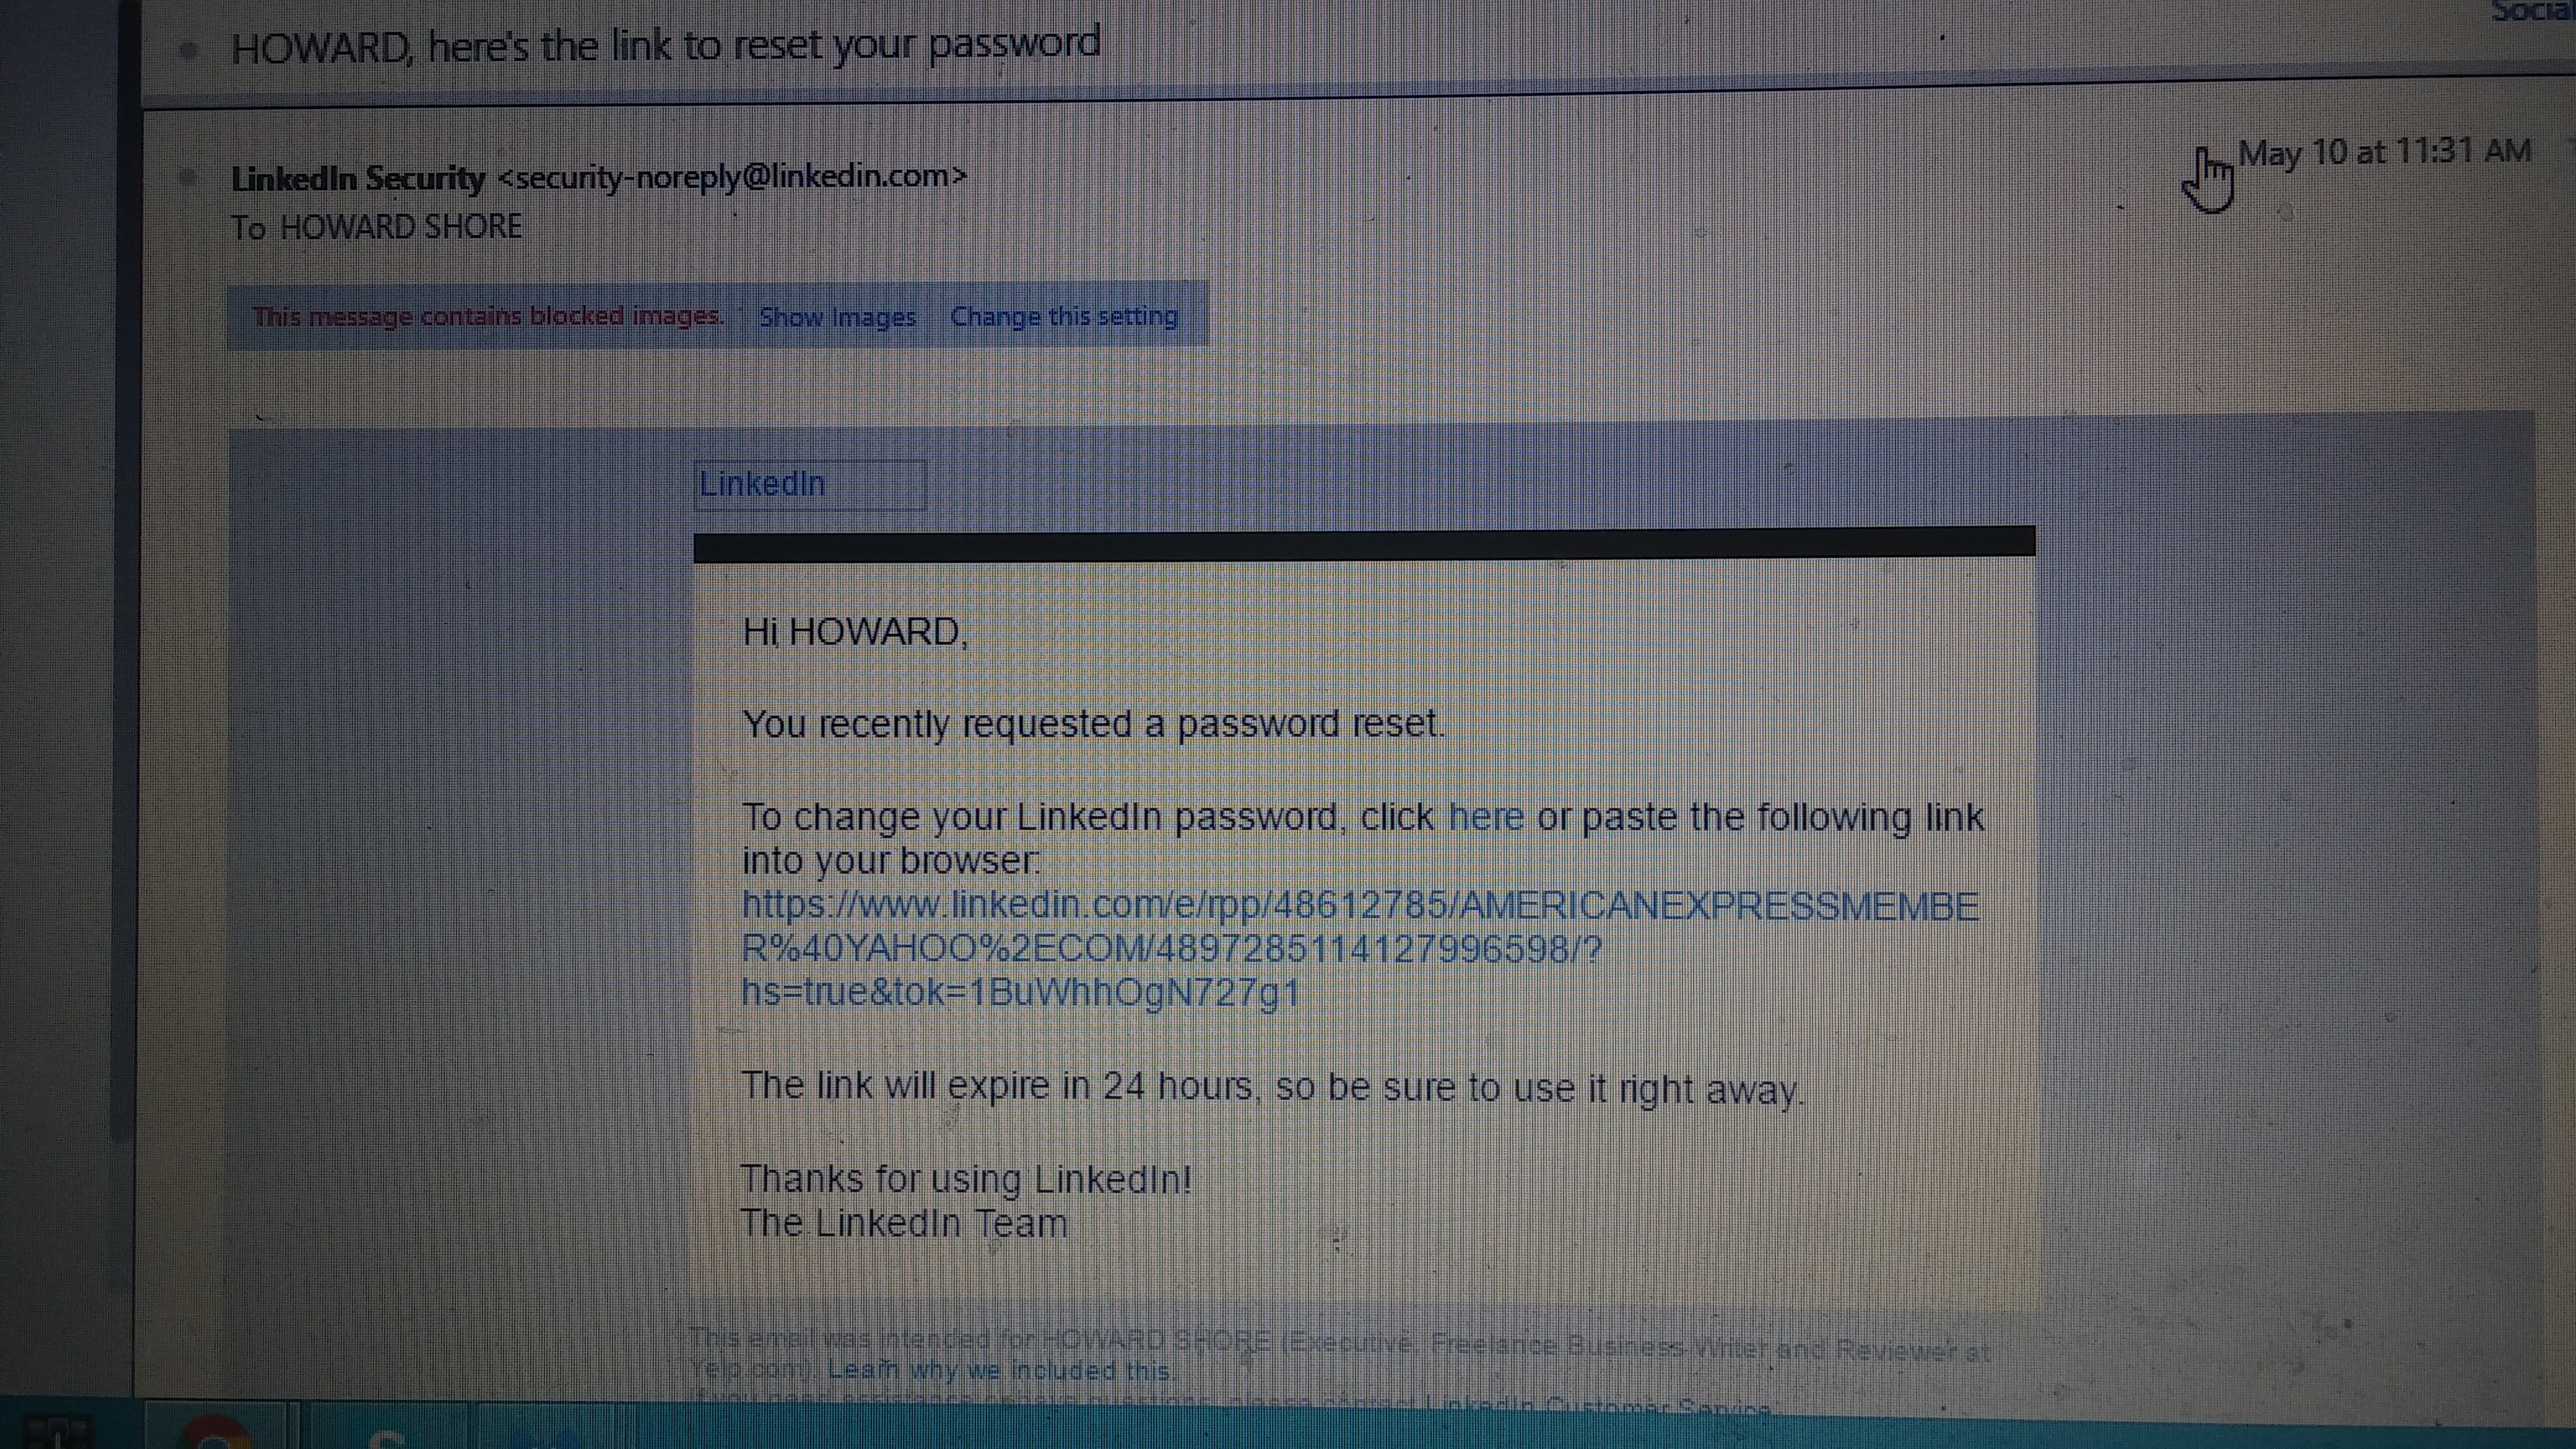 THIS MESSAGE STATED THAT "YOU RECENTLY REQUESTED A PASSWORD RESET".

YES TO ACCESS MY ORIGINAL ACCOUNT!

OBVIOUSLY!